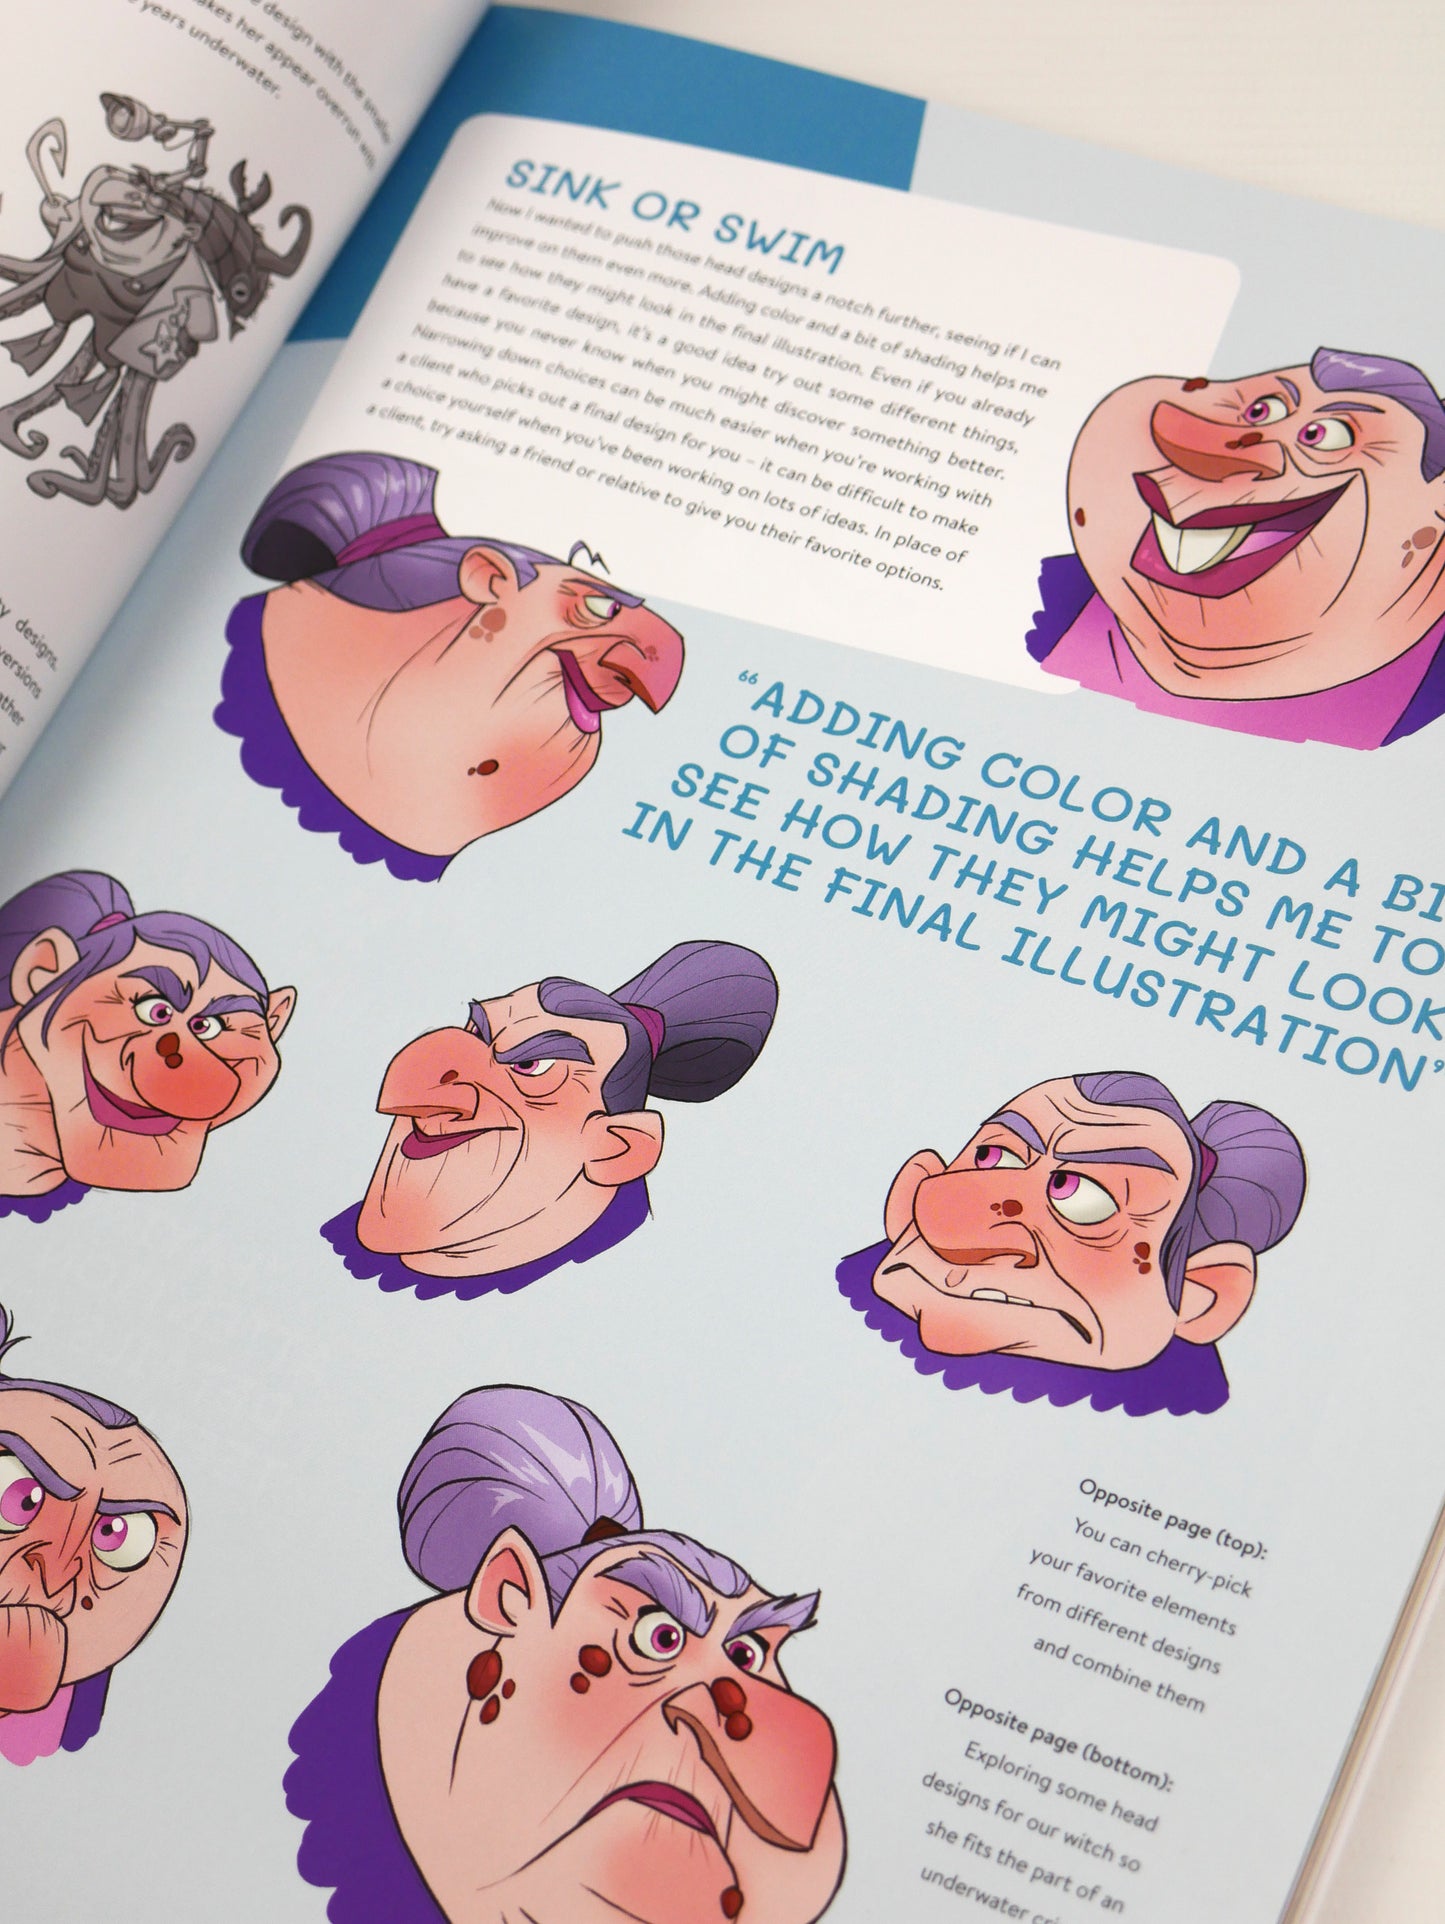 Character Design Quarterly subscription - pay annually